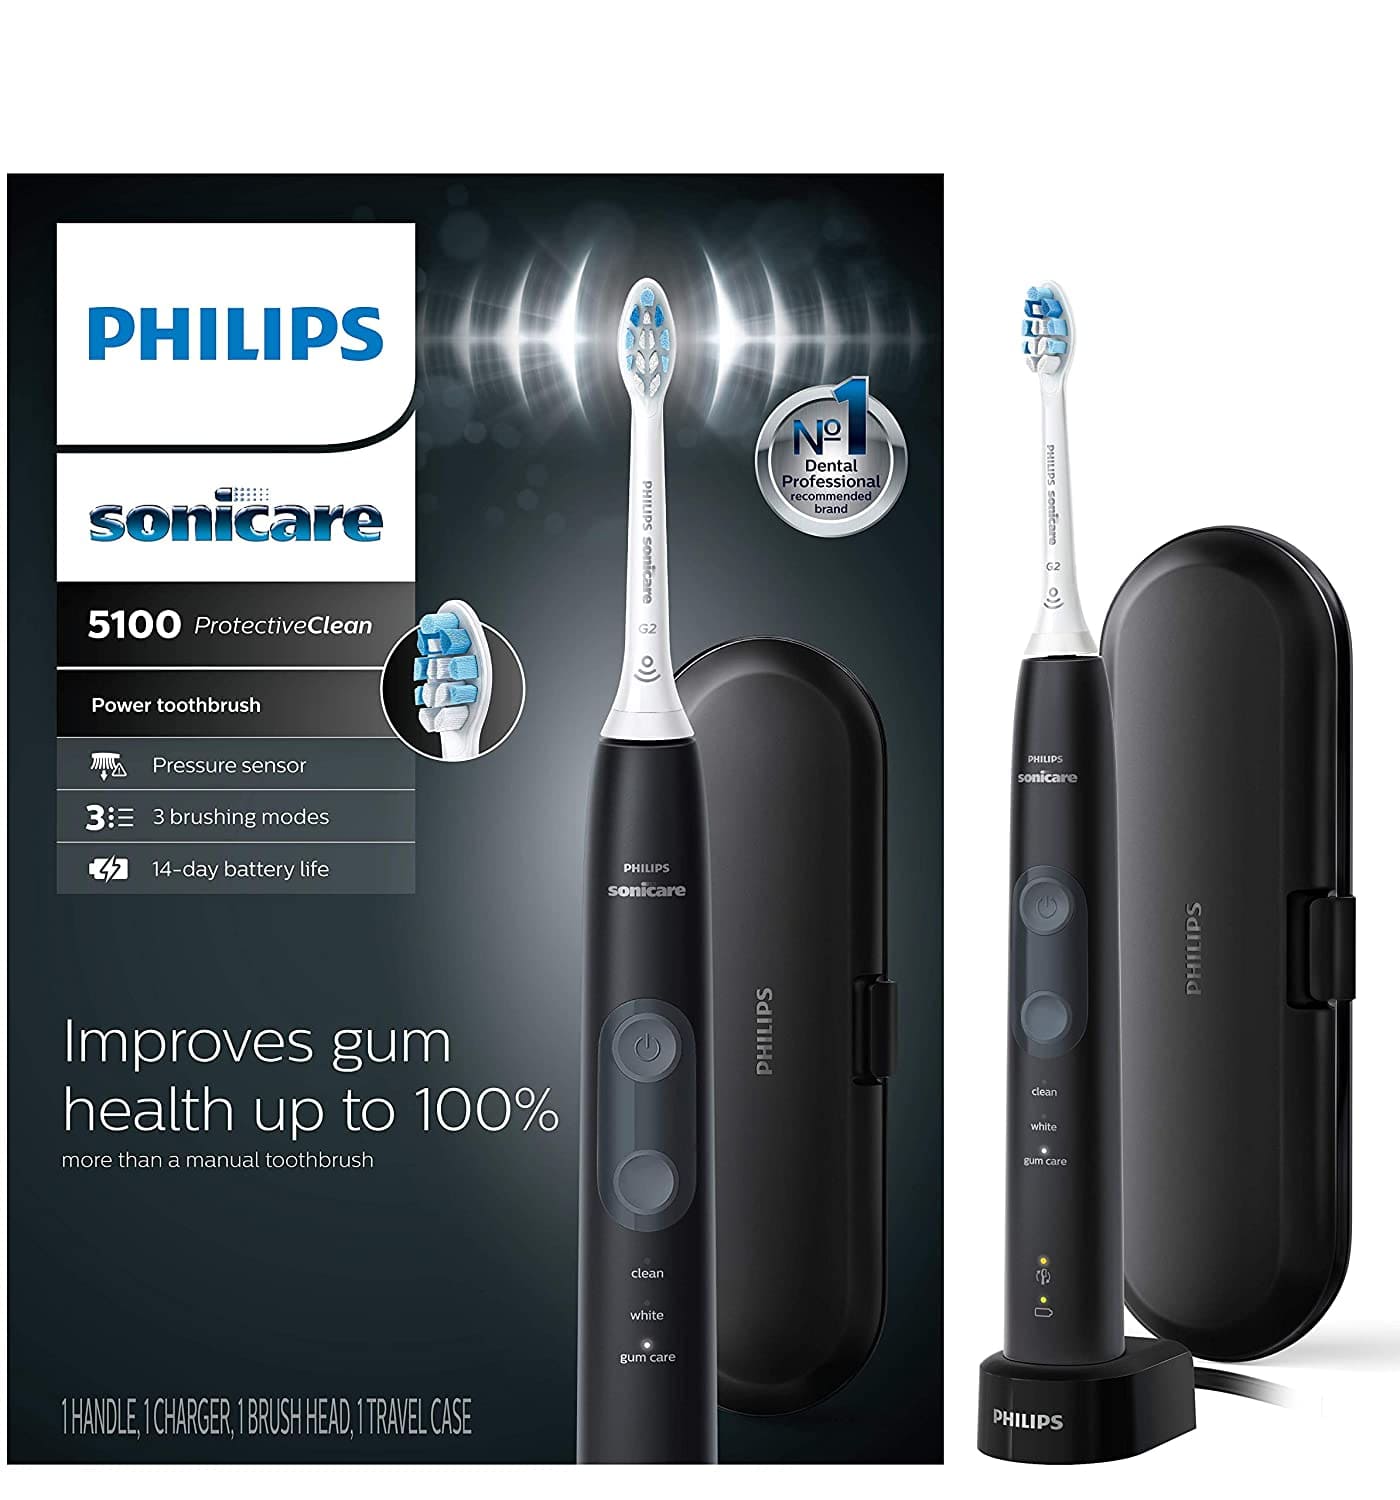 Philips Sonicare Protective Clean 5100 is high rated electric toothbrush in amazon